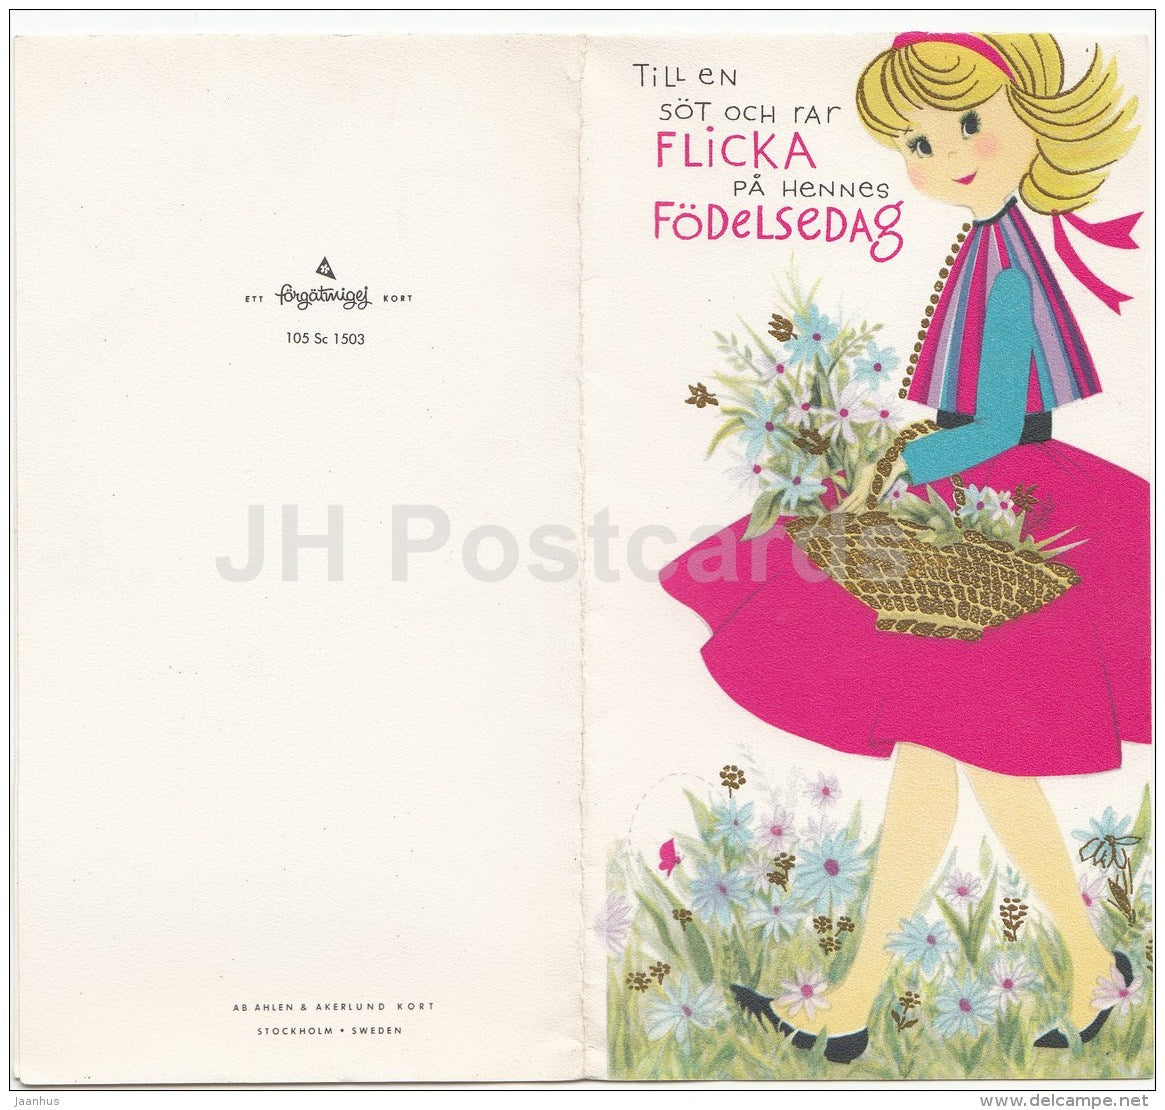 Birthday Greeting Card - a cute and sweet girl on her birthday - flowers with basket - Sweden - used - JH Postcards